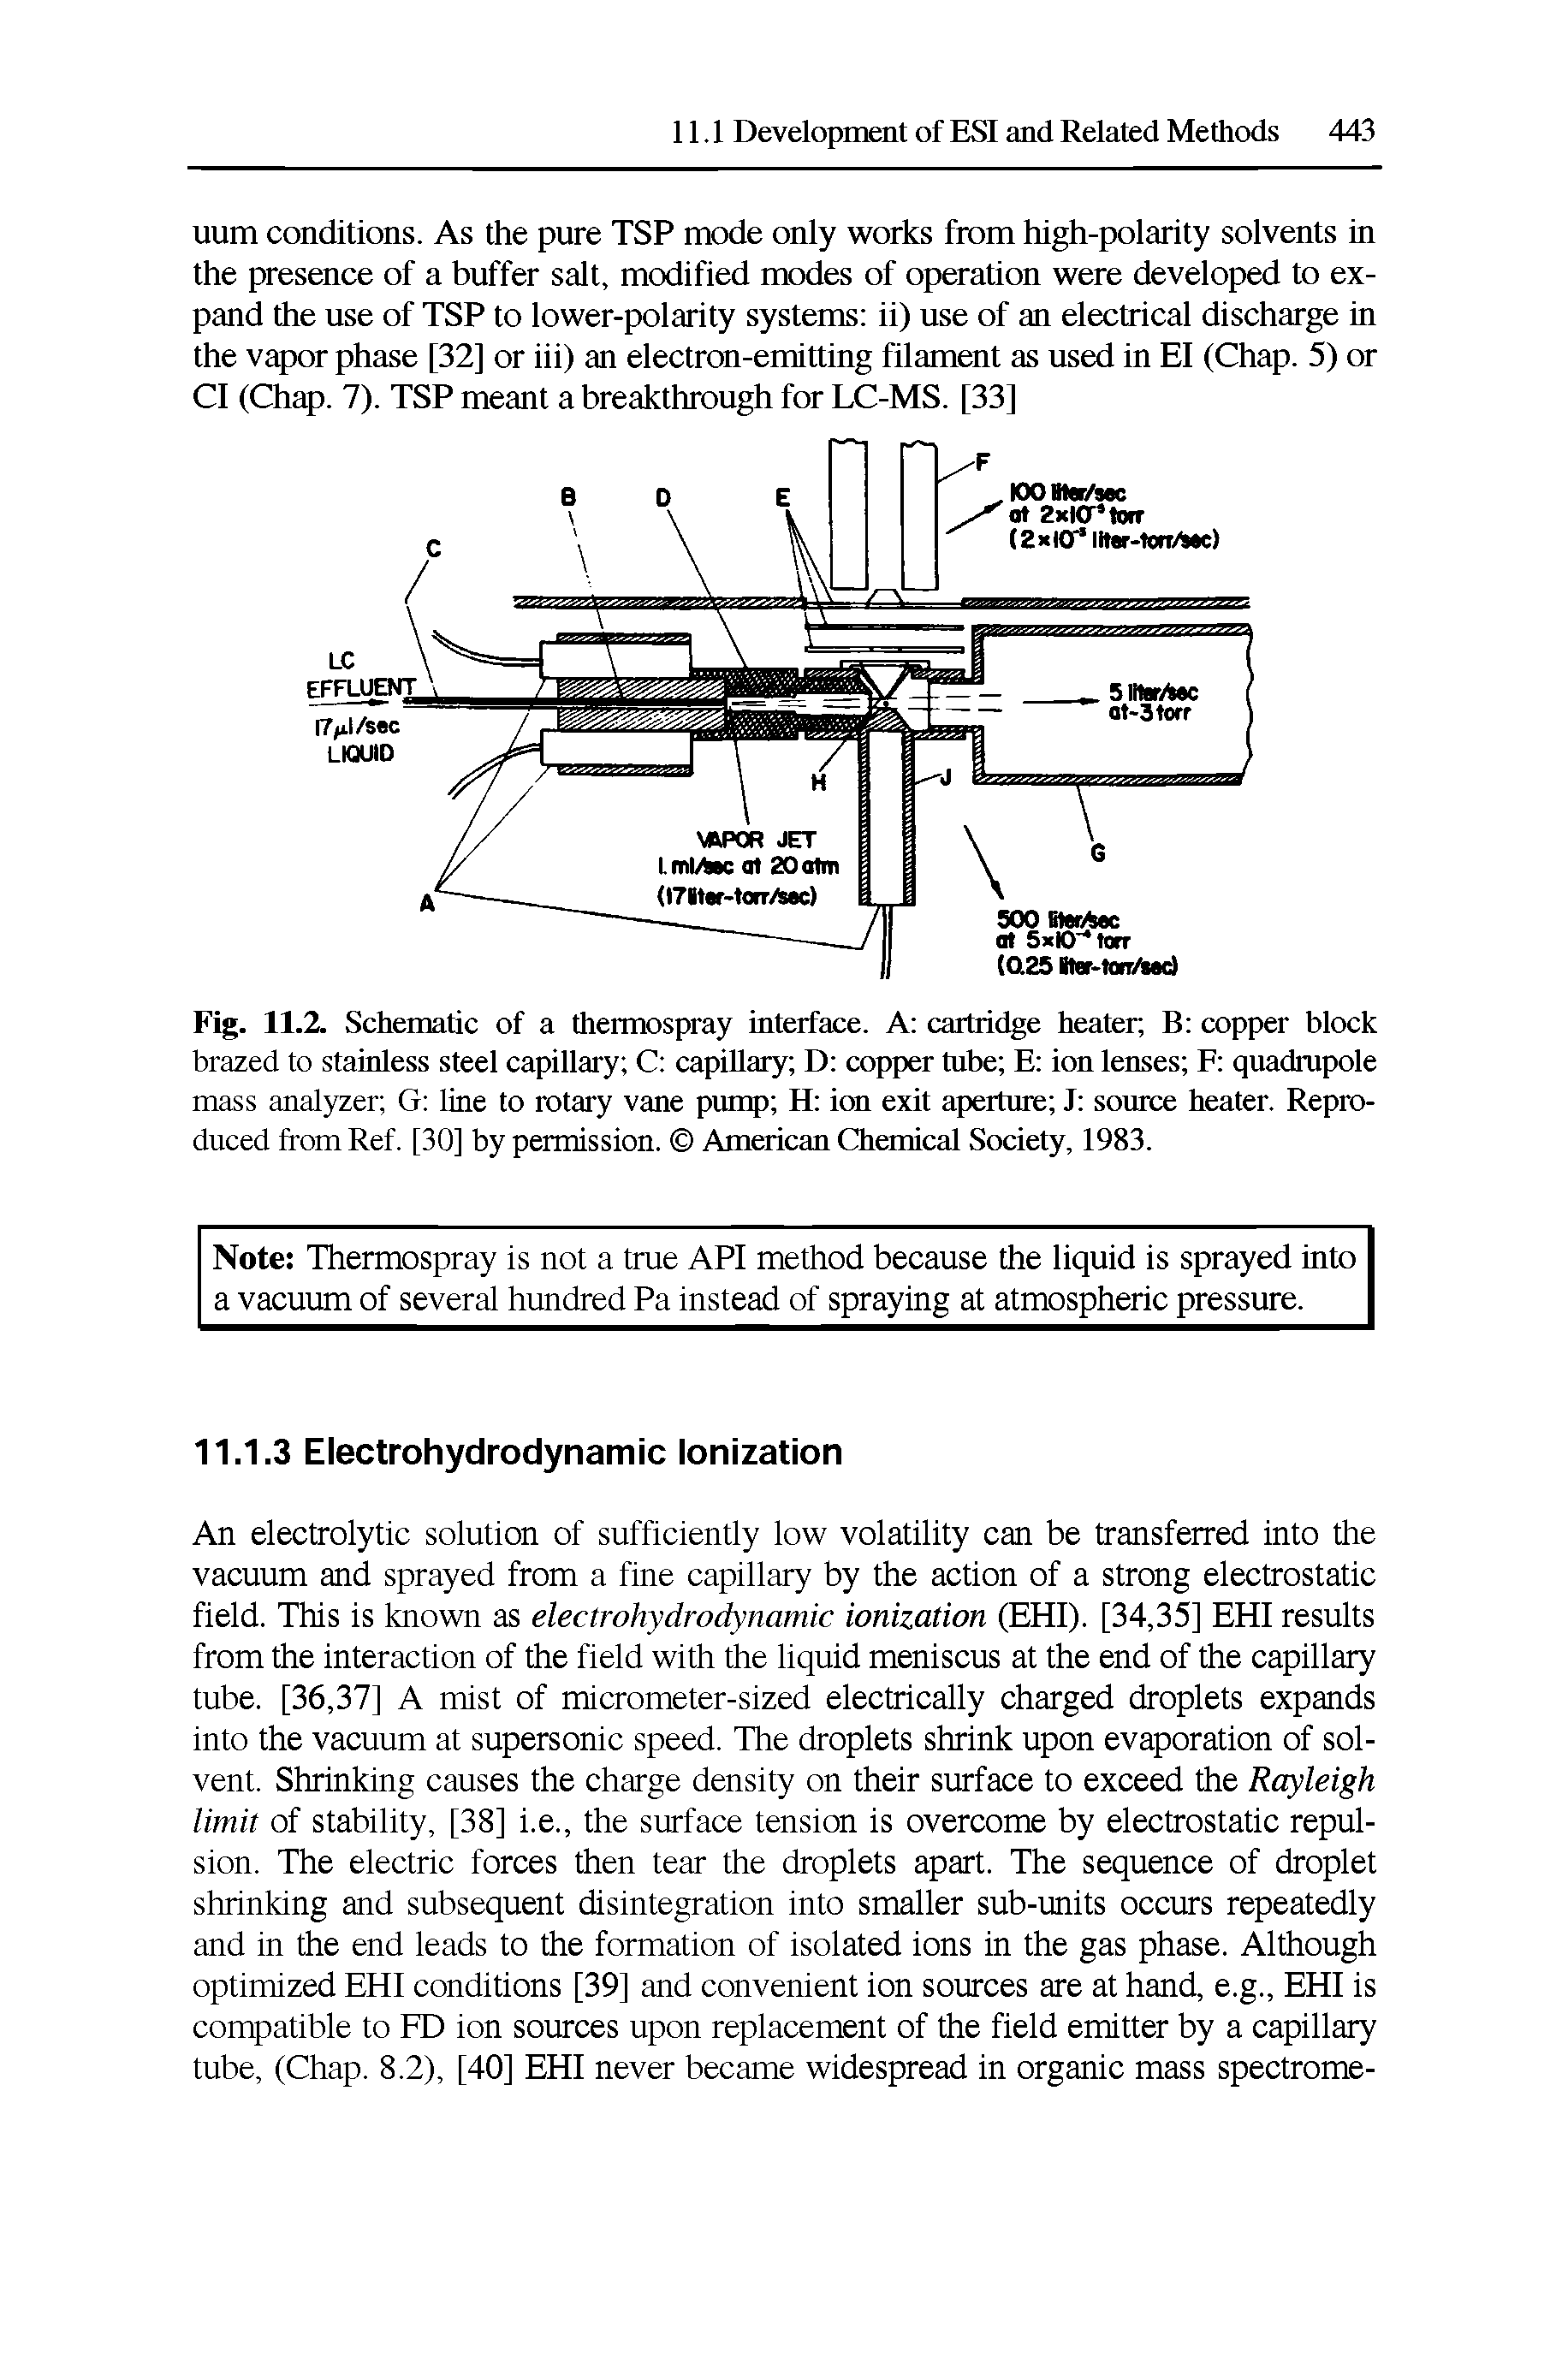 Fig. 11.2. Schematic of a thermospray interface. A cartridge heater B copper block brazed to stainless steel capillary C capillary D copper tube E ion lenses E quadrupole mass analyzer G line to rotary vane pump H ion exit aperture J source heater. Reproduced from Ref. [30] by permission. American Chemical Society, 1983.